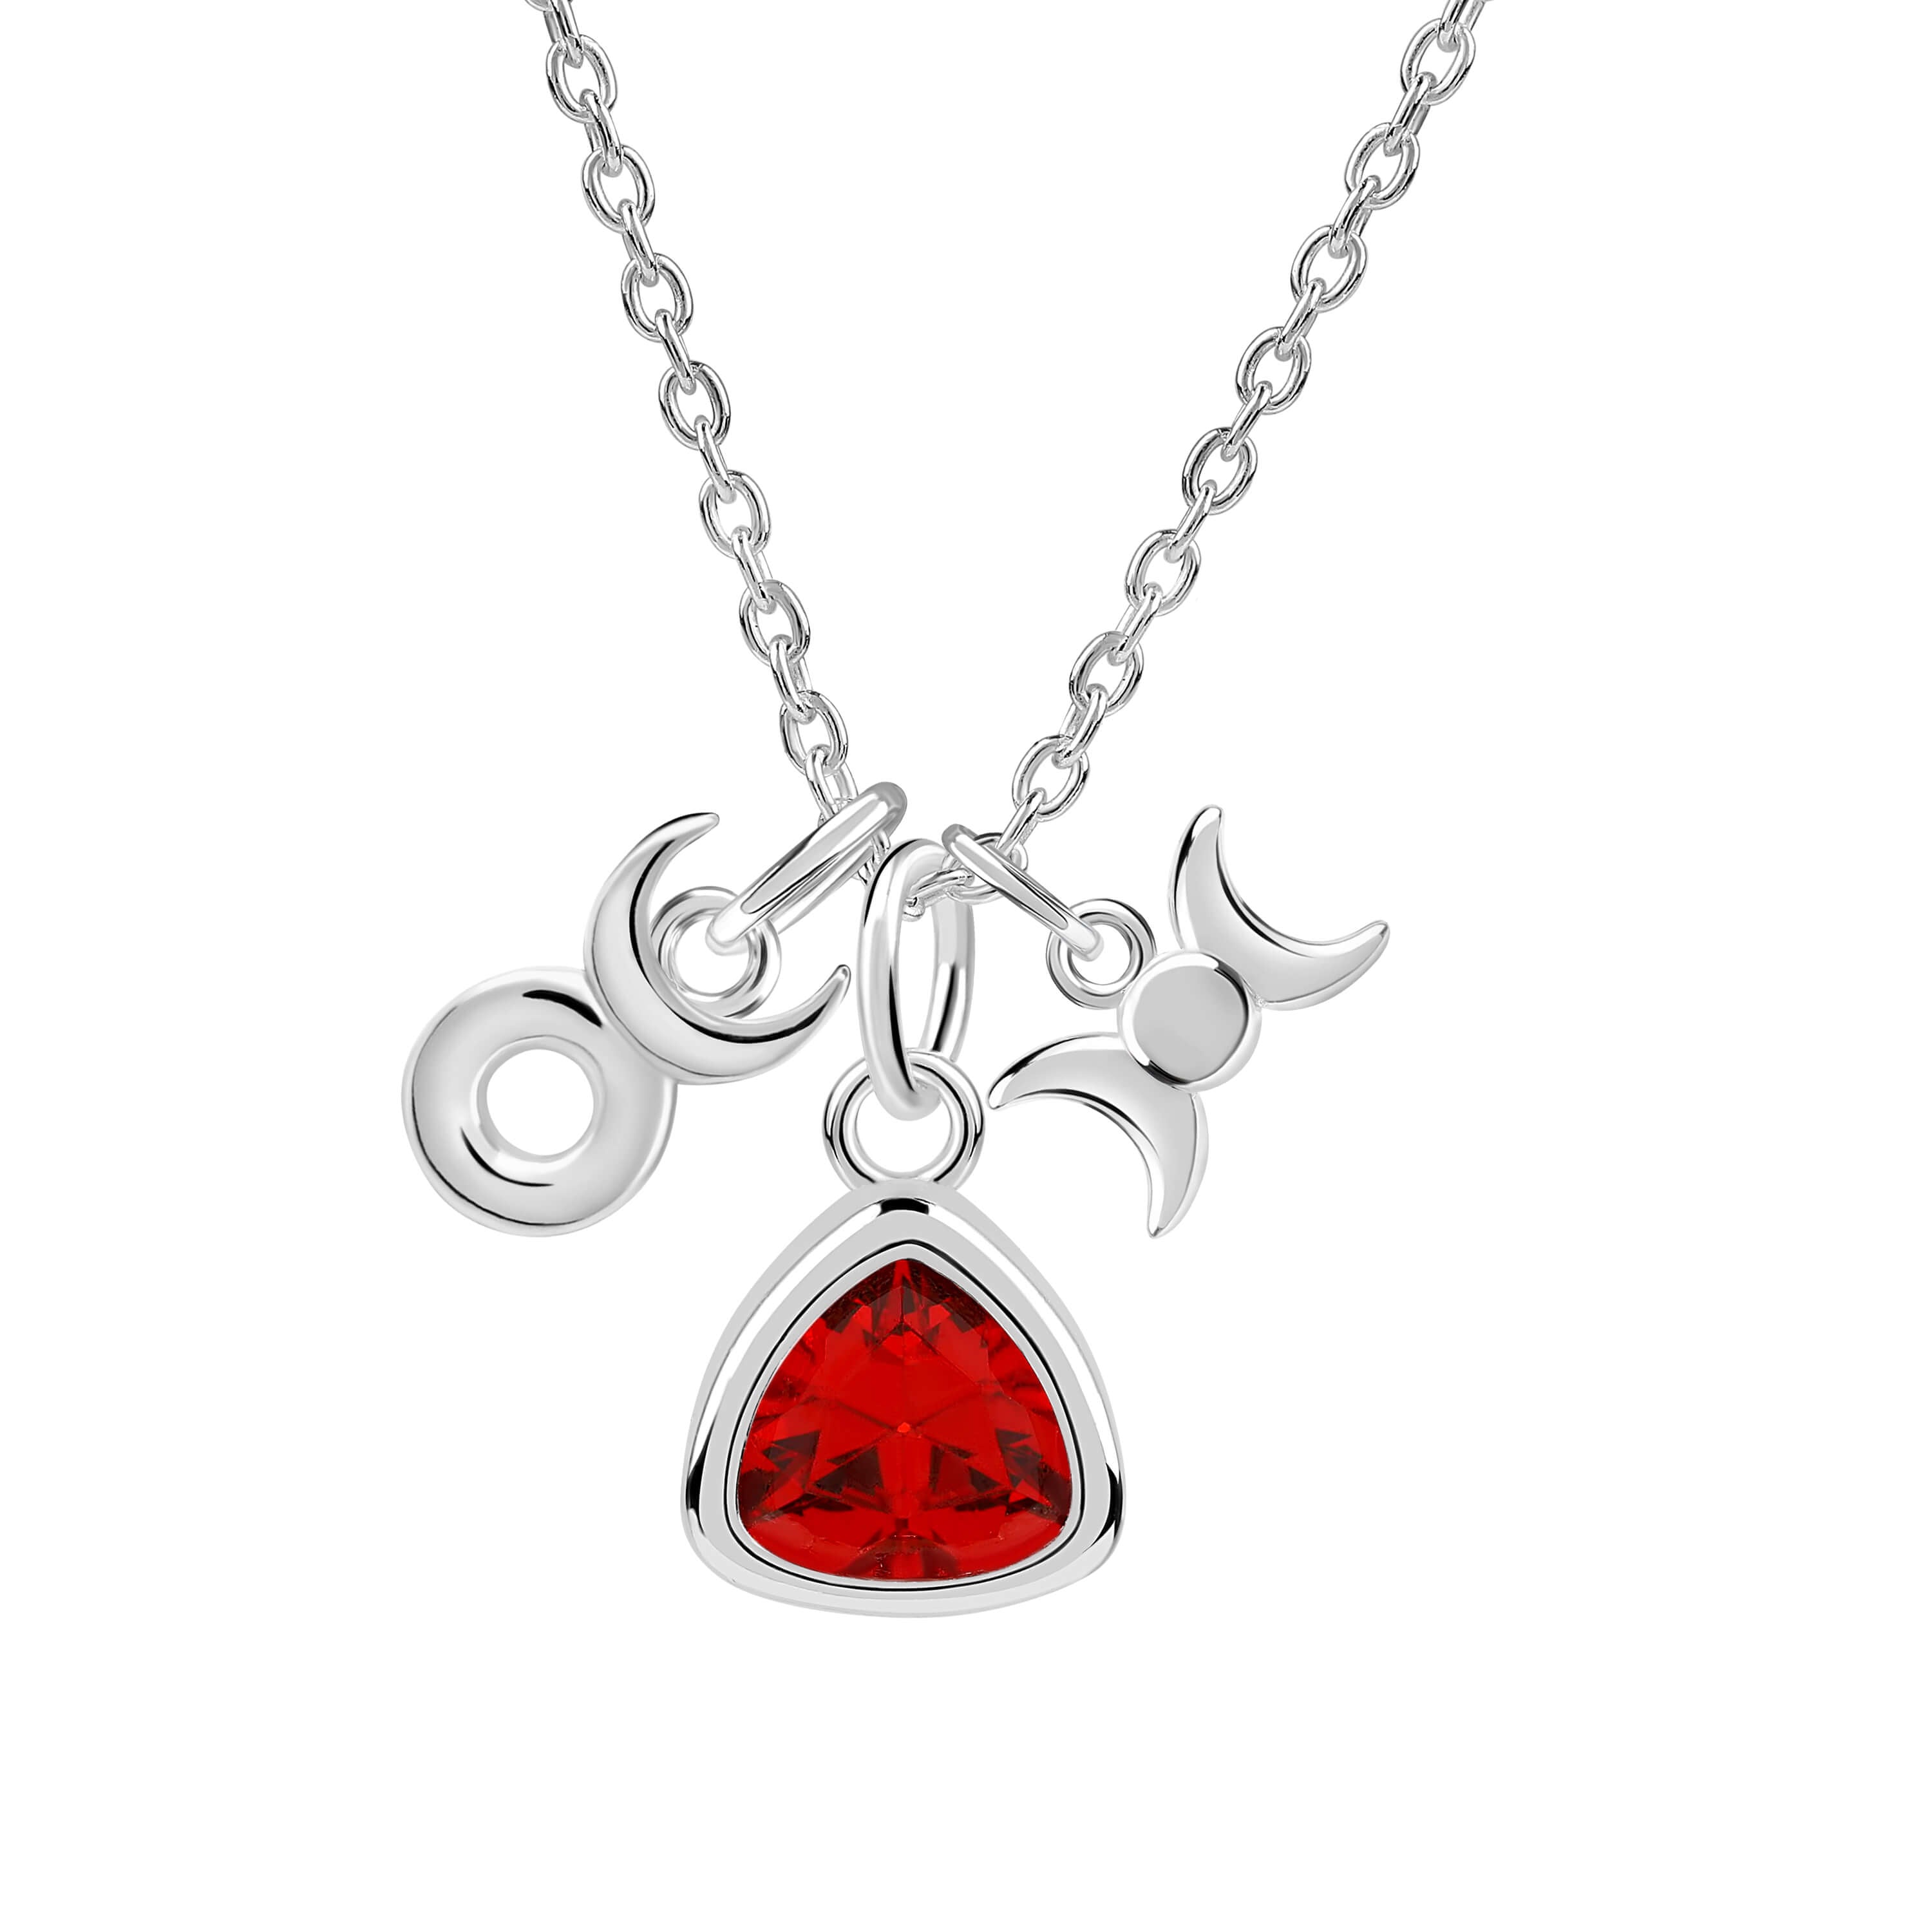 Mothers Charm Necklace, Silver Droplet Charms with Birthstones for Three  Children